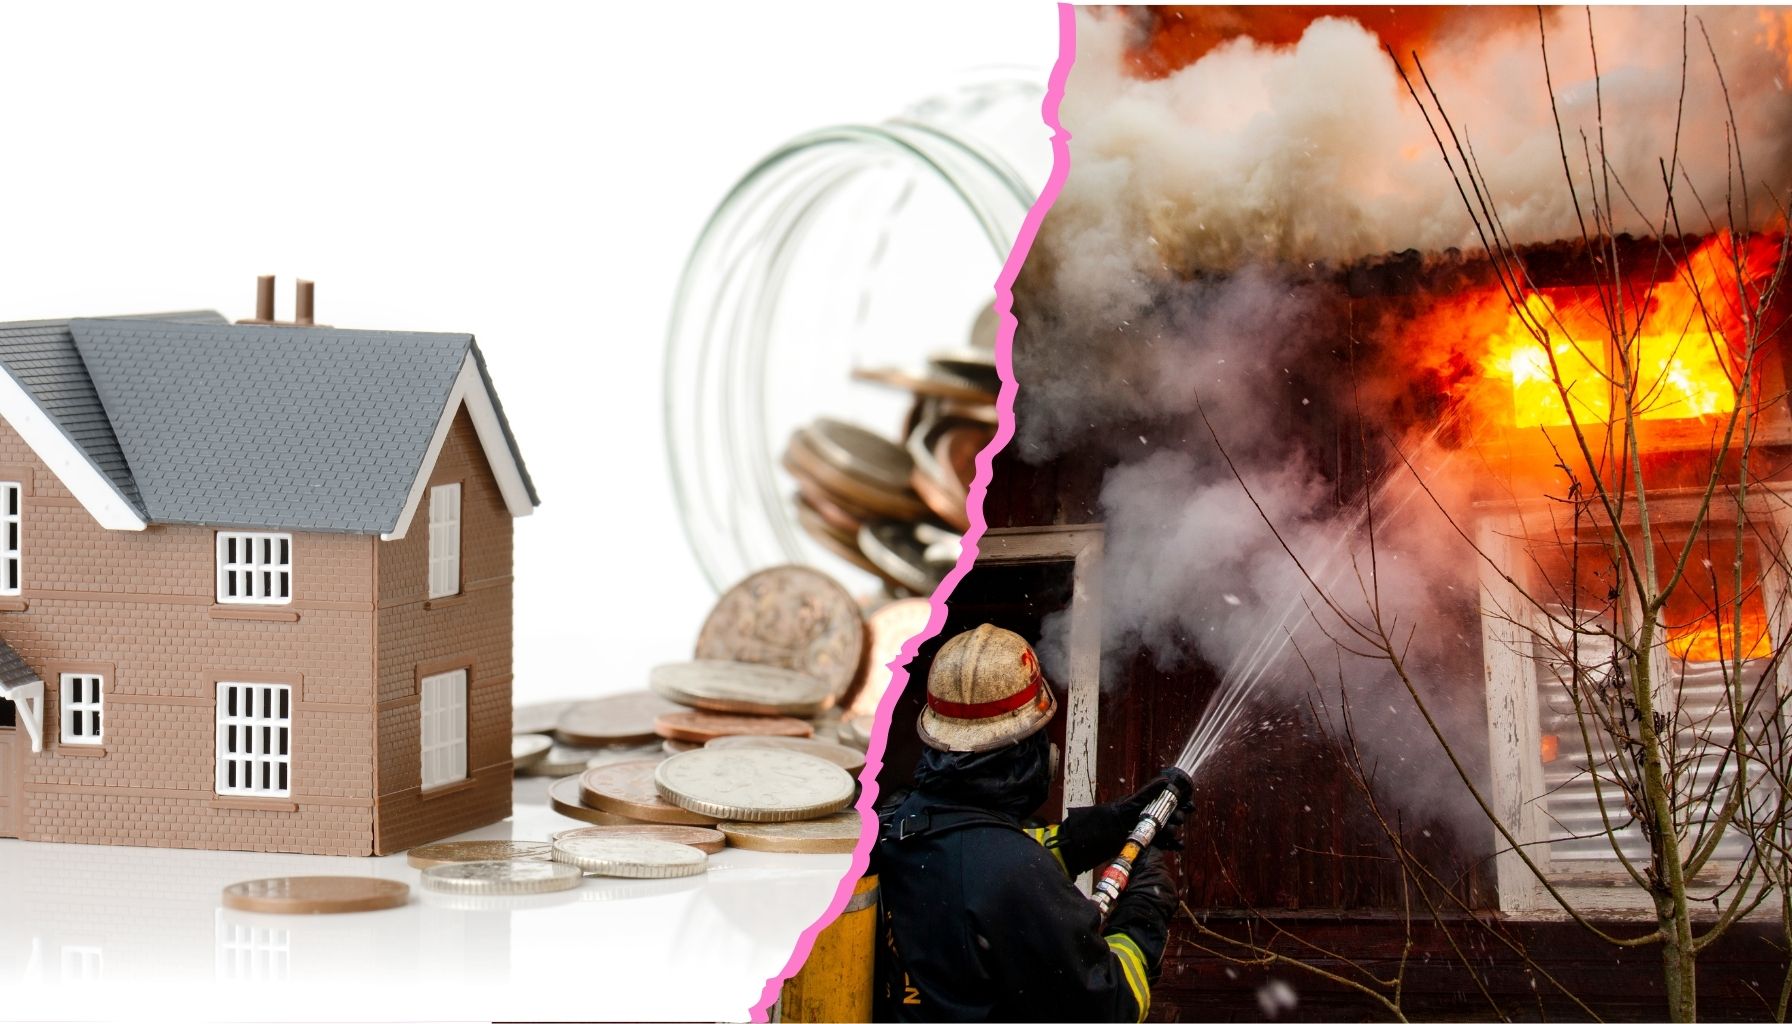 A split image: left side shows a model house with coins and a glass jar; right side shows a fireman extinguishing a burning house, emphasizing the importance of water damage restoration in protecting your investments. -PureOneServices